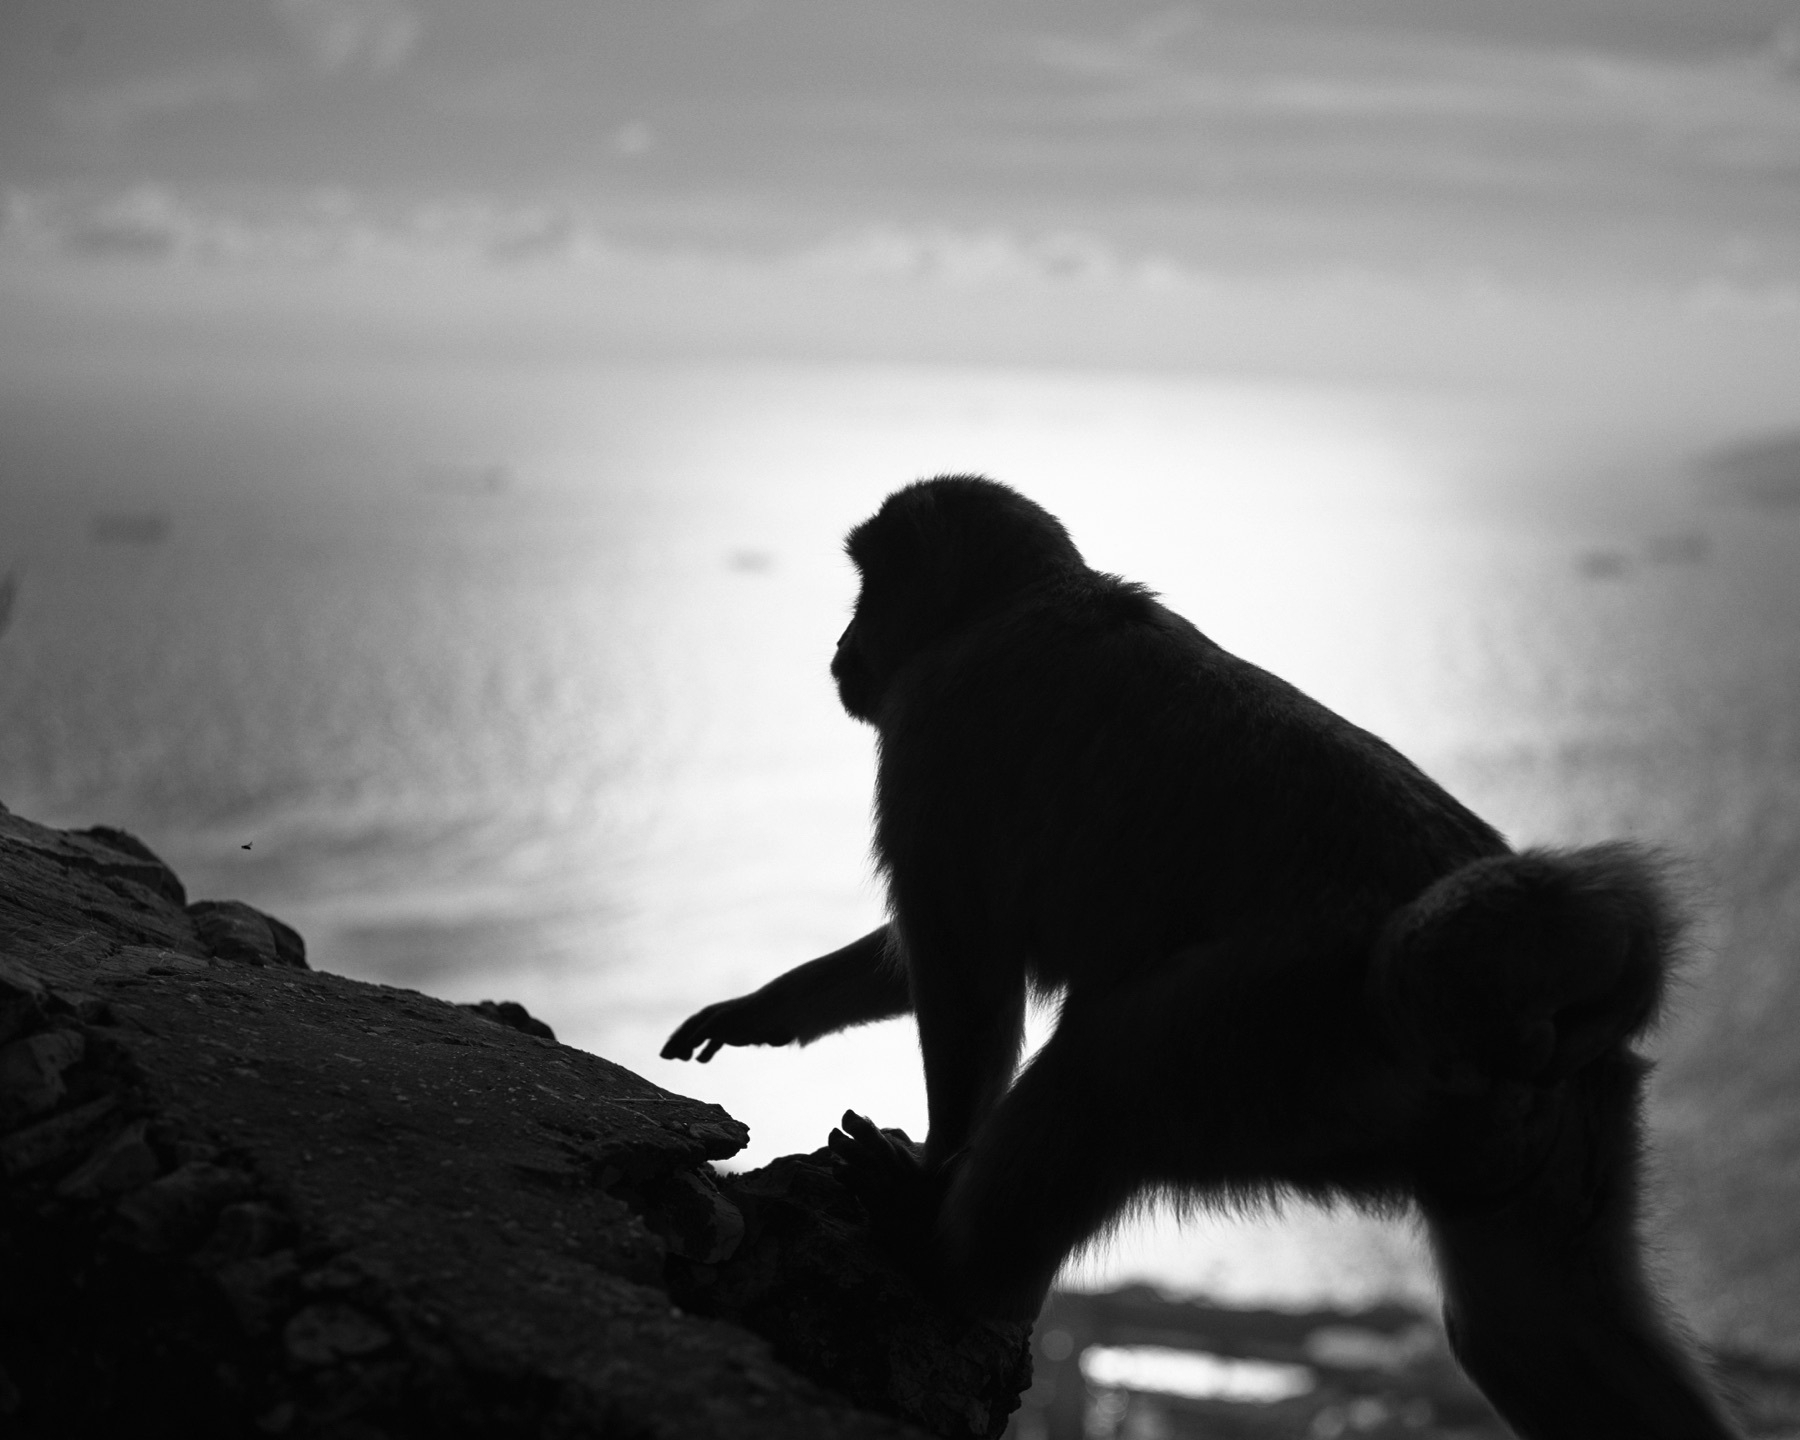 A sillouette of a monkey on a rock face, in the background there is a column of light from the sea framing the outside of the monkey.